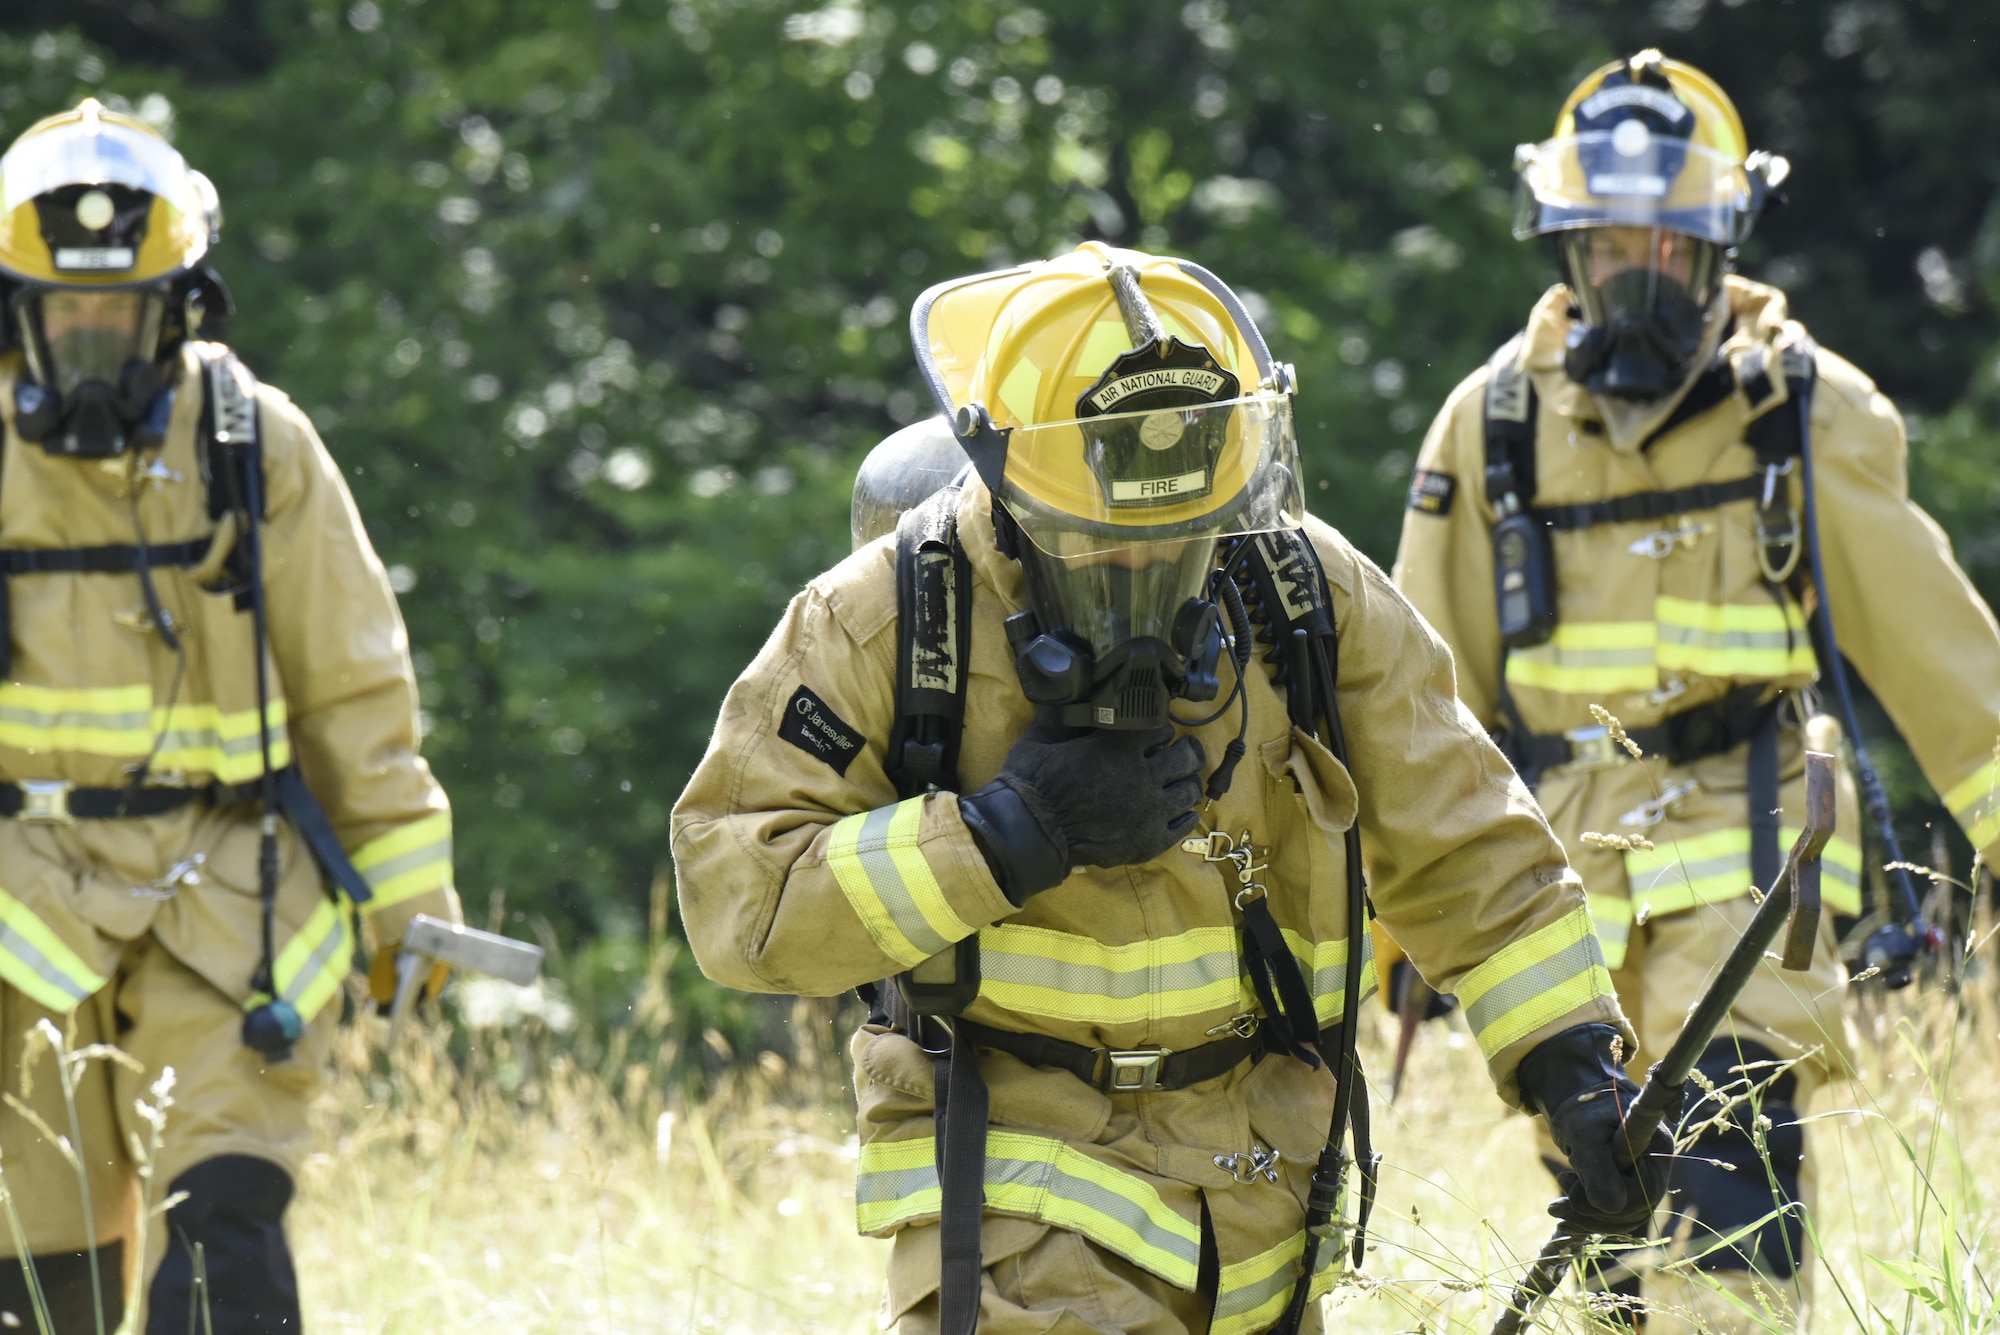 Three fire fighters with the North Carolina Nation Guard's Army and Air Force firefighting team walk away from the site of a simulated fire while at Vigilant Catamount, an interagency domestic exercise between local, state, and military personnel in North Carolina, at Dupont State Forest, Hendersonville North Carolina, June 8, 2017. Vigilant Catamount is a multi-day exercise testing emergency response, starting with the simulated crash of an F-15 aircraft. The fire fighters helped to extinguish two burning vehicles set ablaze to test military emergency firefighting capabilities.